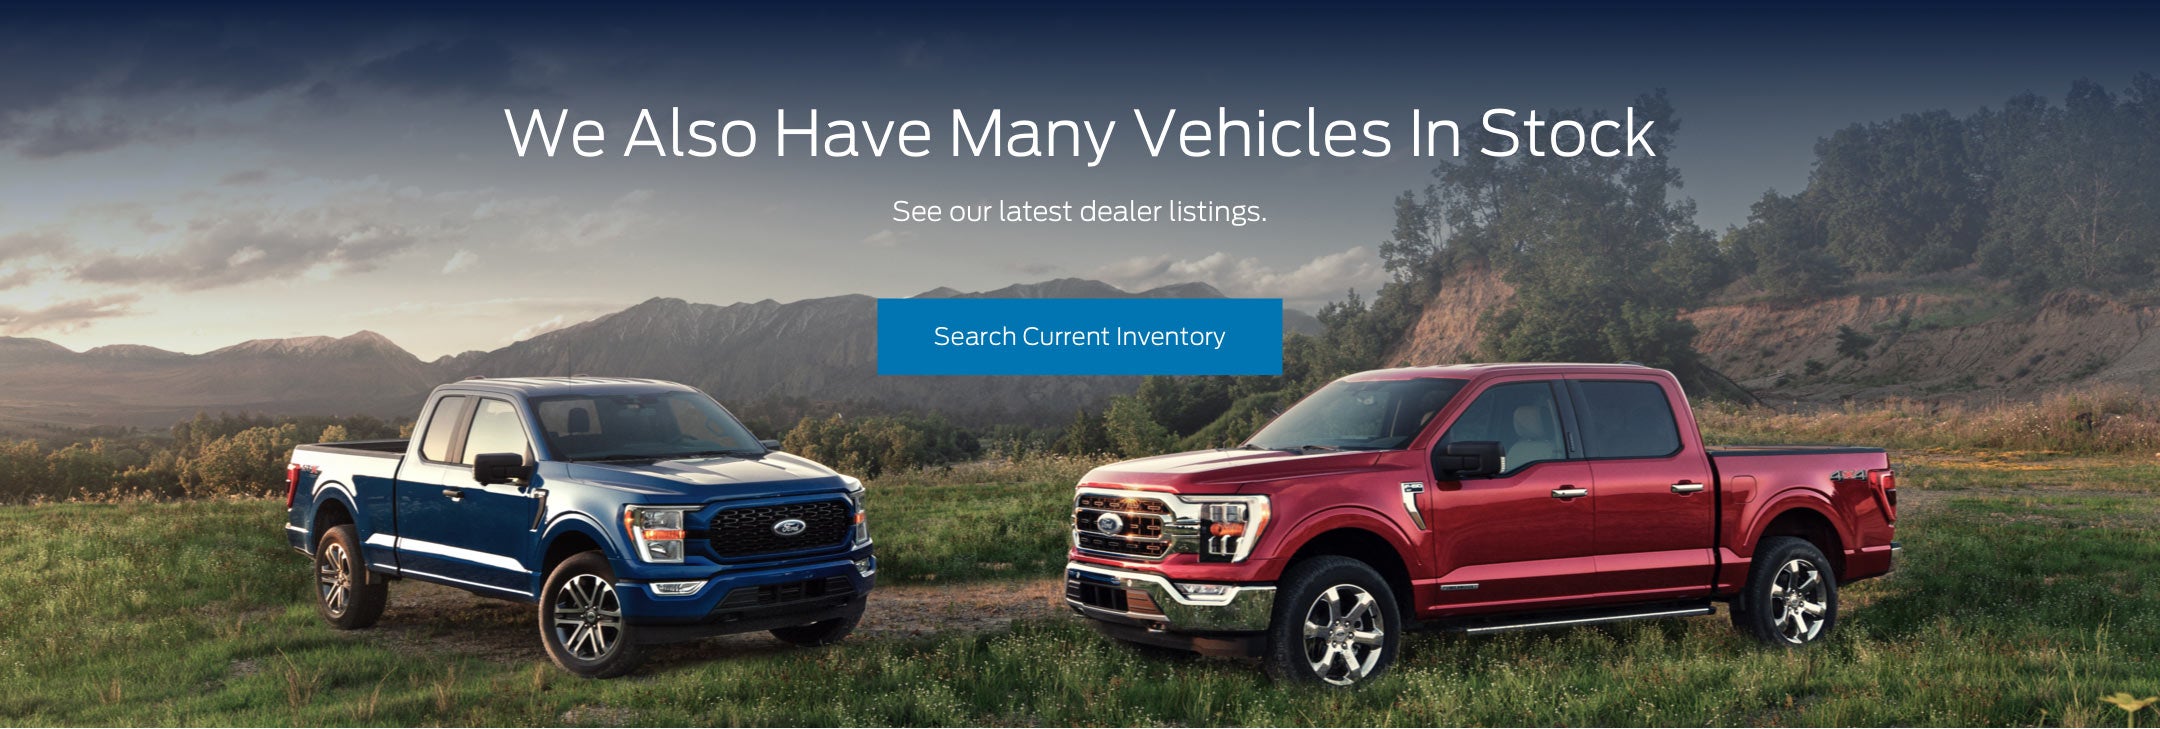 Ford vehicles in stock | Sanders Ford in Jacksonville NC